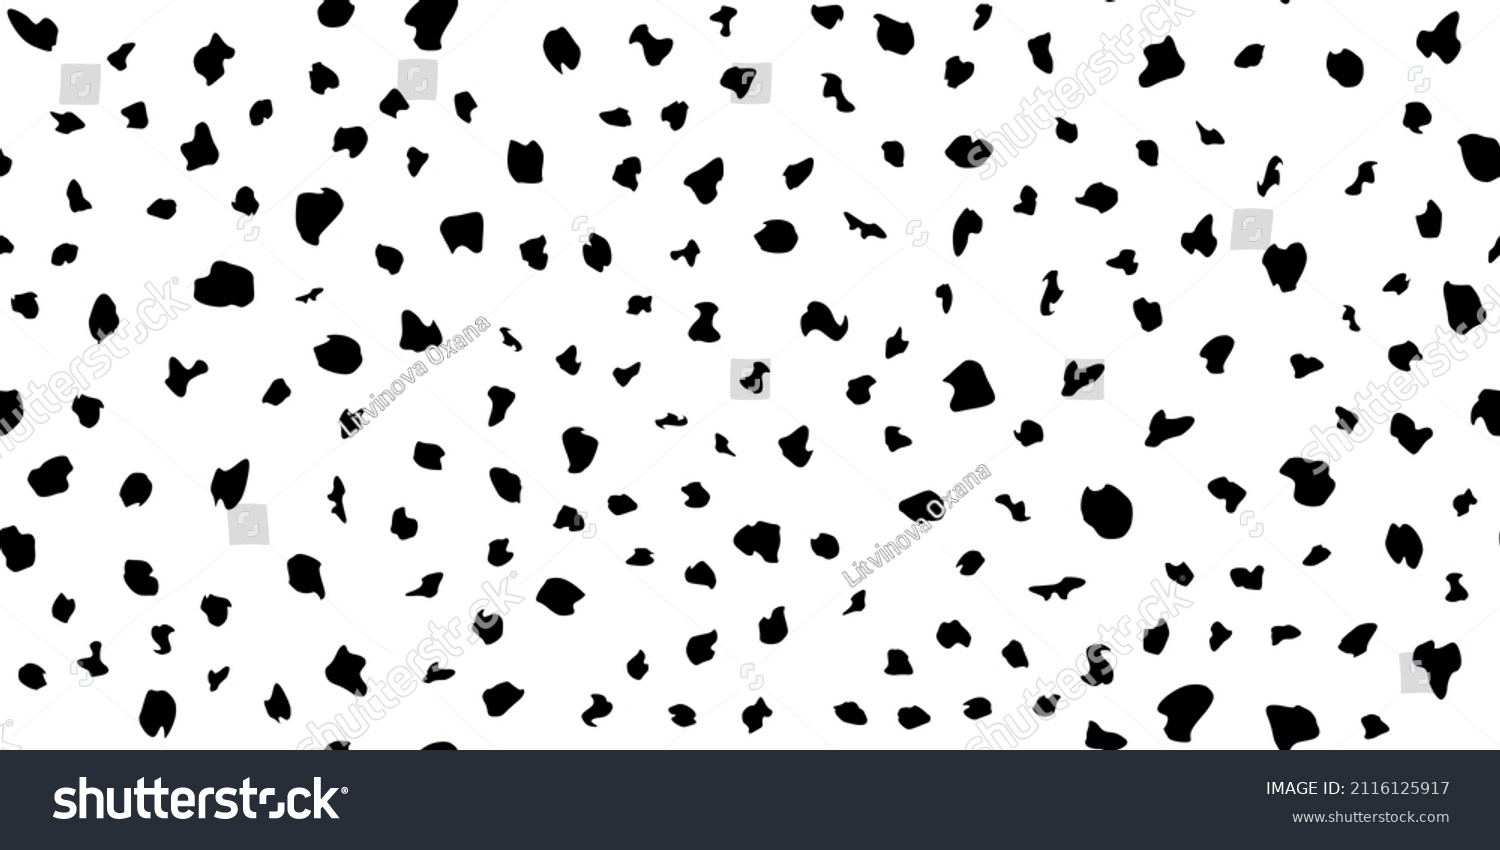 SVG of Puppy dalmatian fur abstract simple seamless pattern. Animal camouflage skin endless texture. Organic irregular dotty backdrop. Cheetah or cow black and white coat texture. Fabric surface design svg